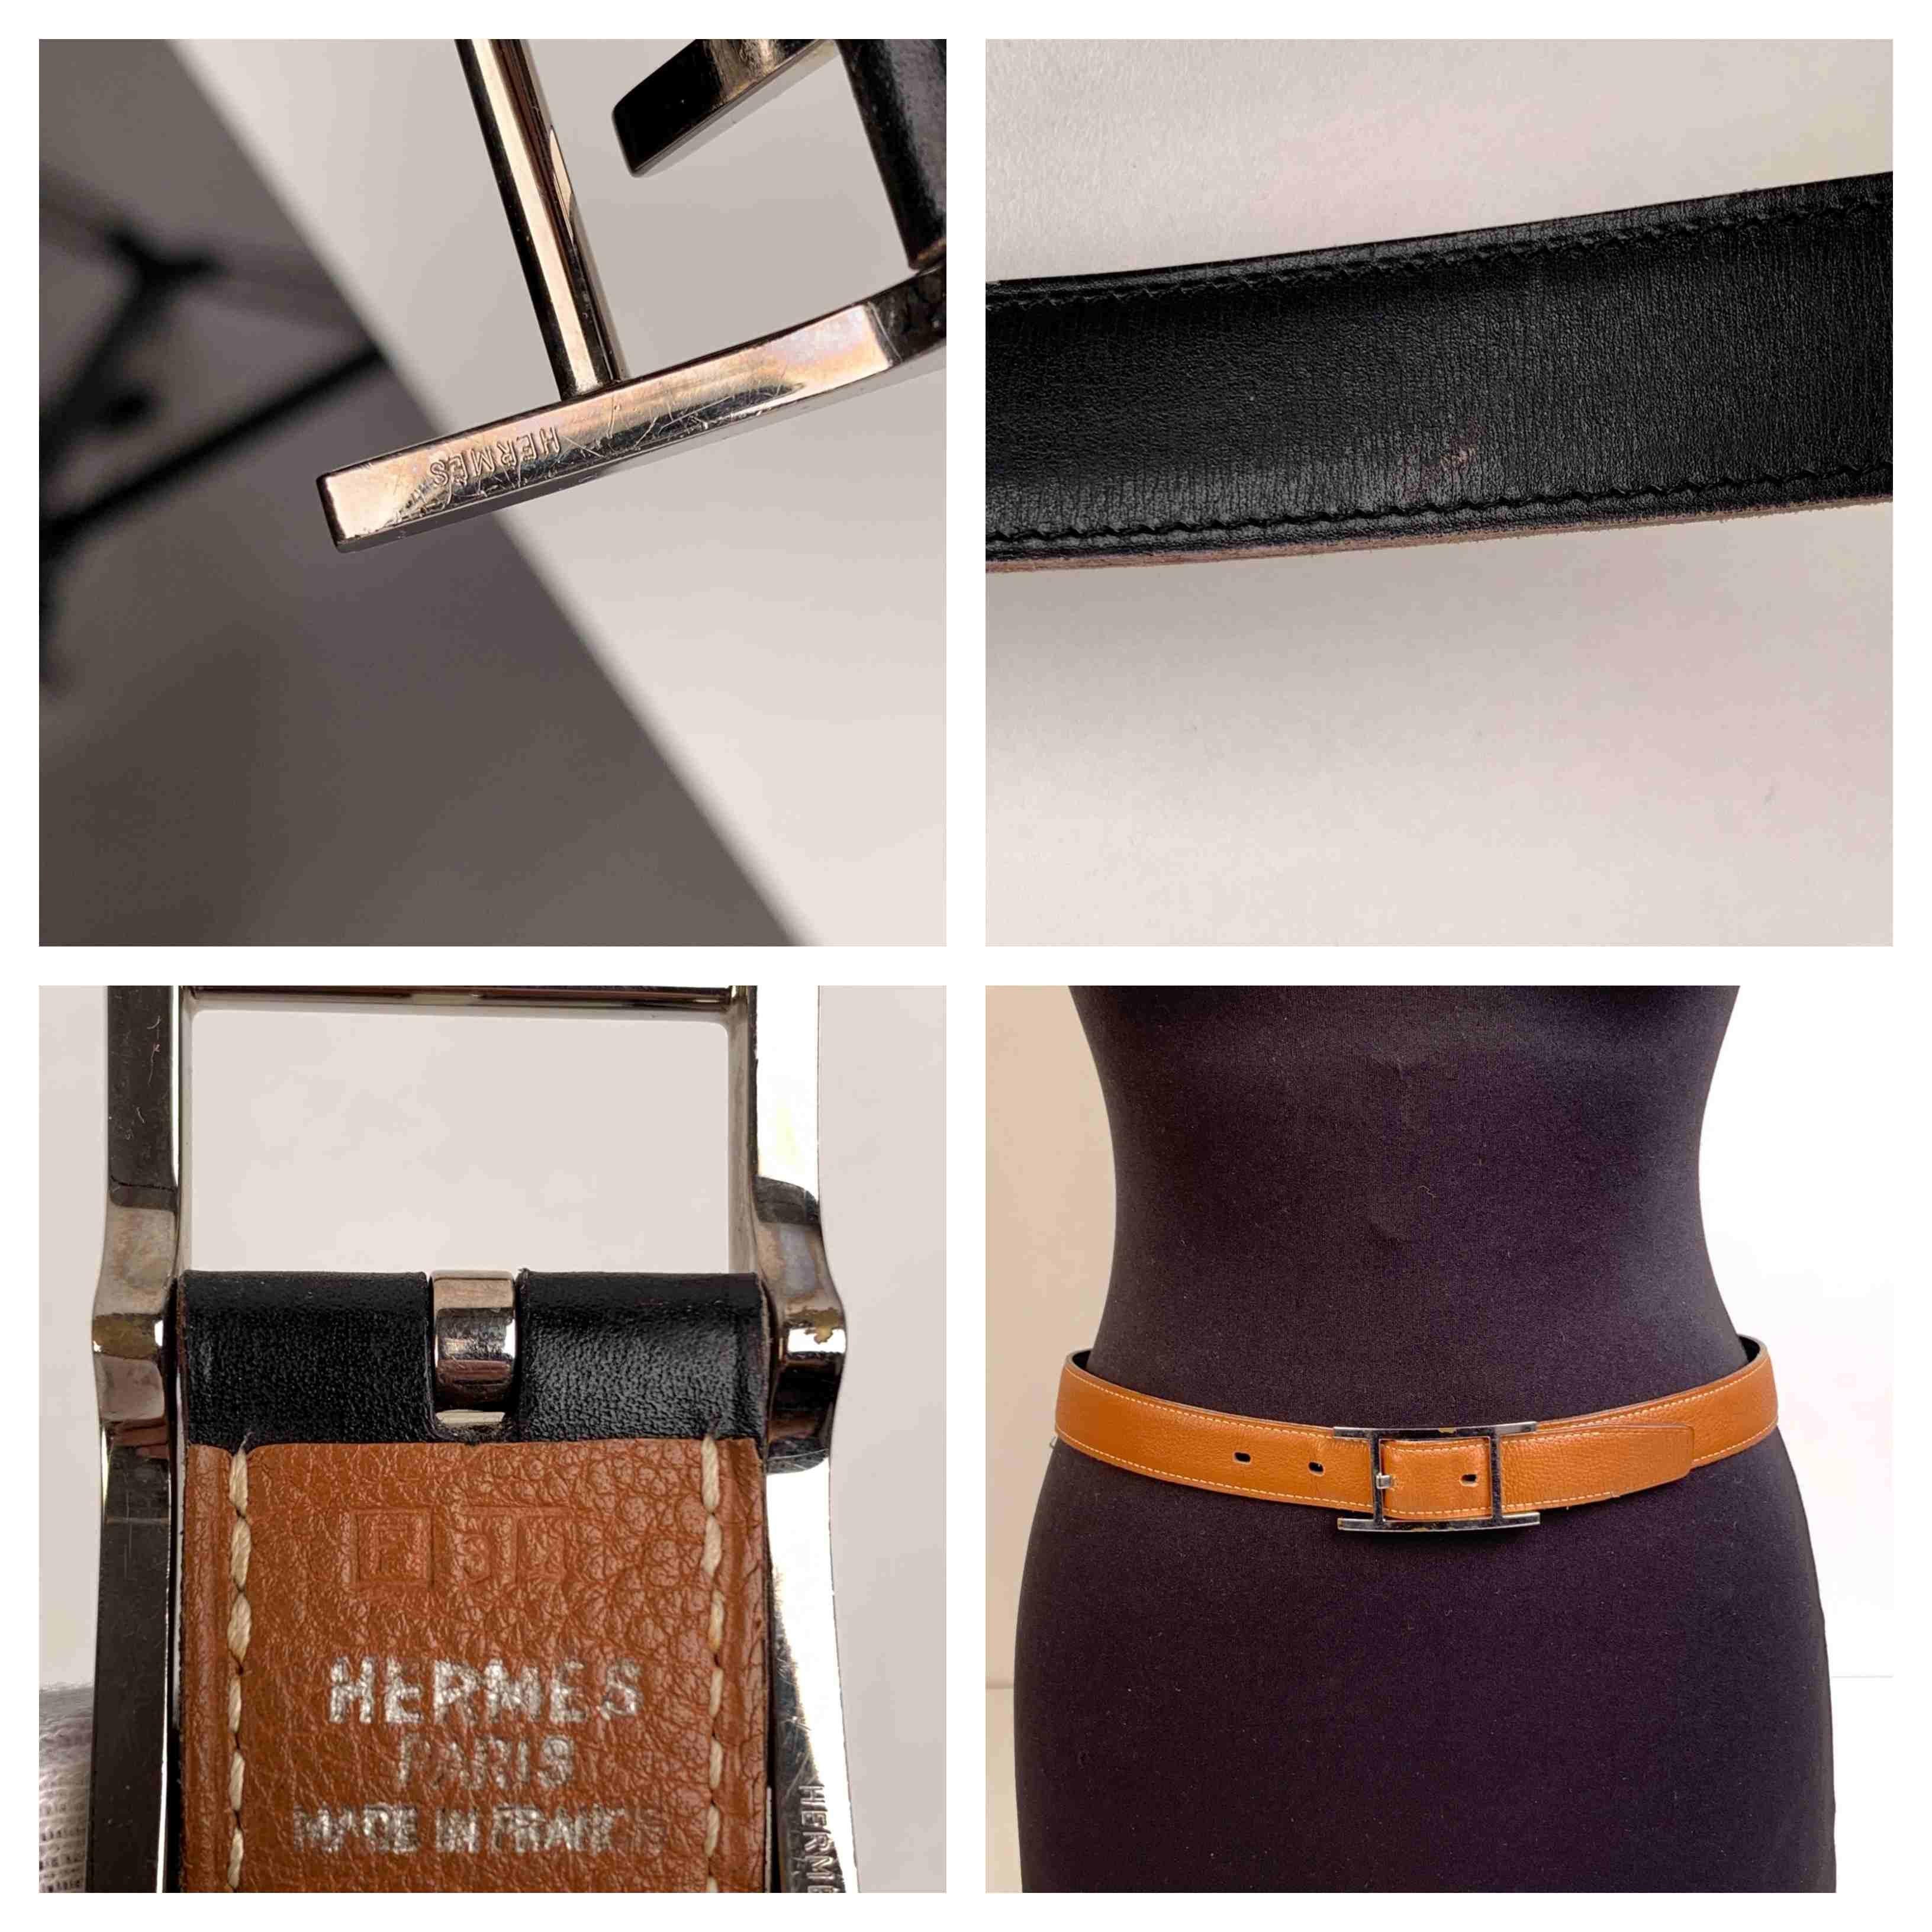 Hermes reversible 'Hapi' belt with H palladium buckle. 4 holes adjustment. Black box calfskin leather on a side and tan pebbled leather on the other side. Signed 'Hermes Paris - Made in France' on the leather. Blindstamp is a 'F' encased in a square